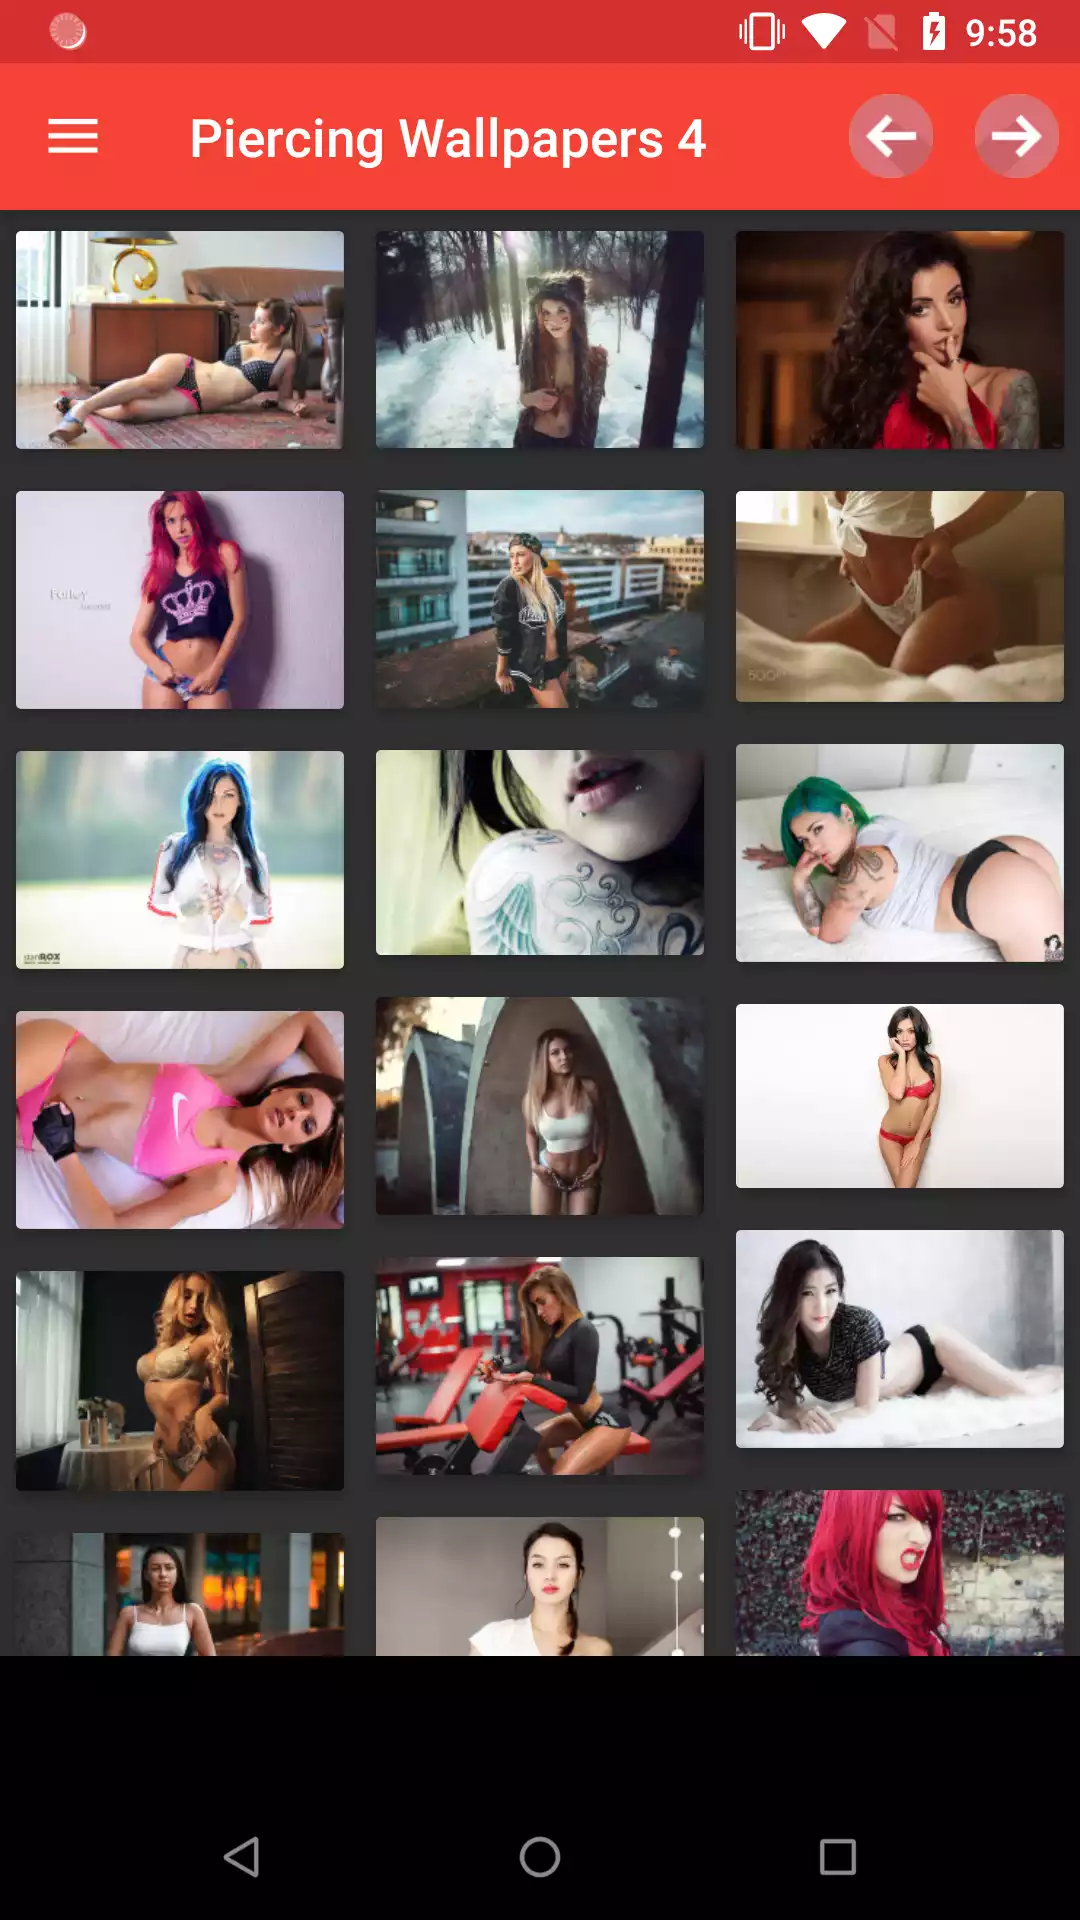 Piercing Wallpapers download,images,black,fetish,android,personalizations,app,offline,sissy,wallpapers,apps,pics,mythras,apk,porn,girls,jpg,hentai,sexy,backgrounds,feast,demonic,lair,piercing,fuck